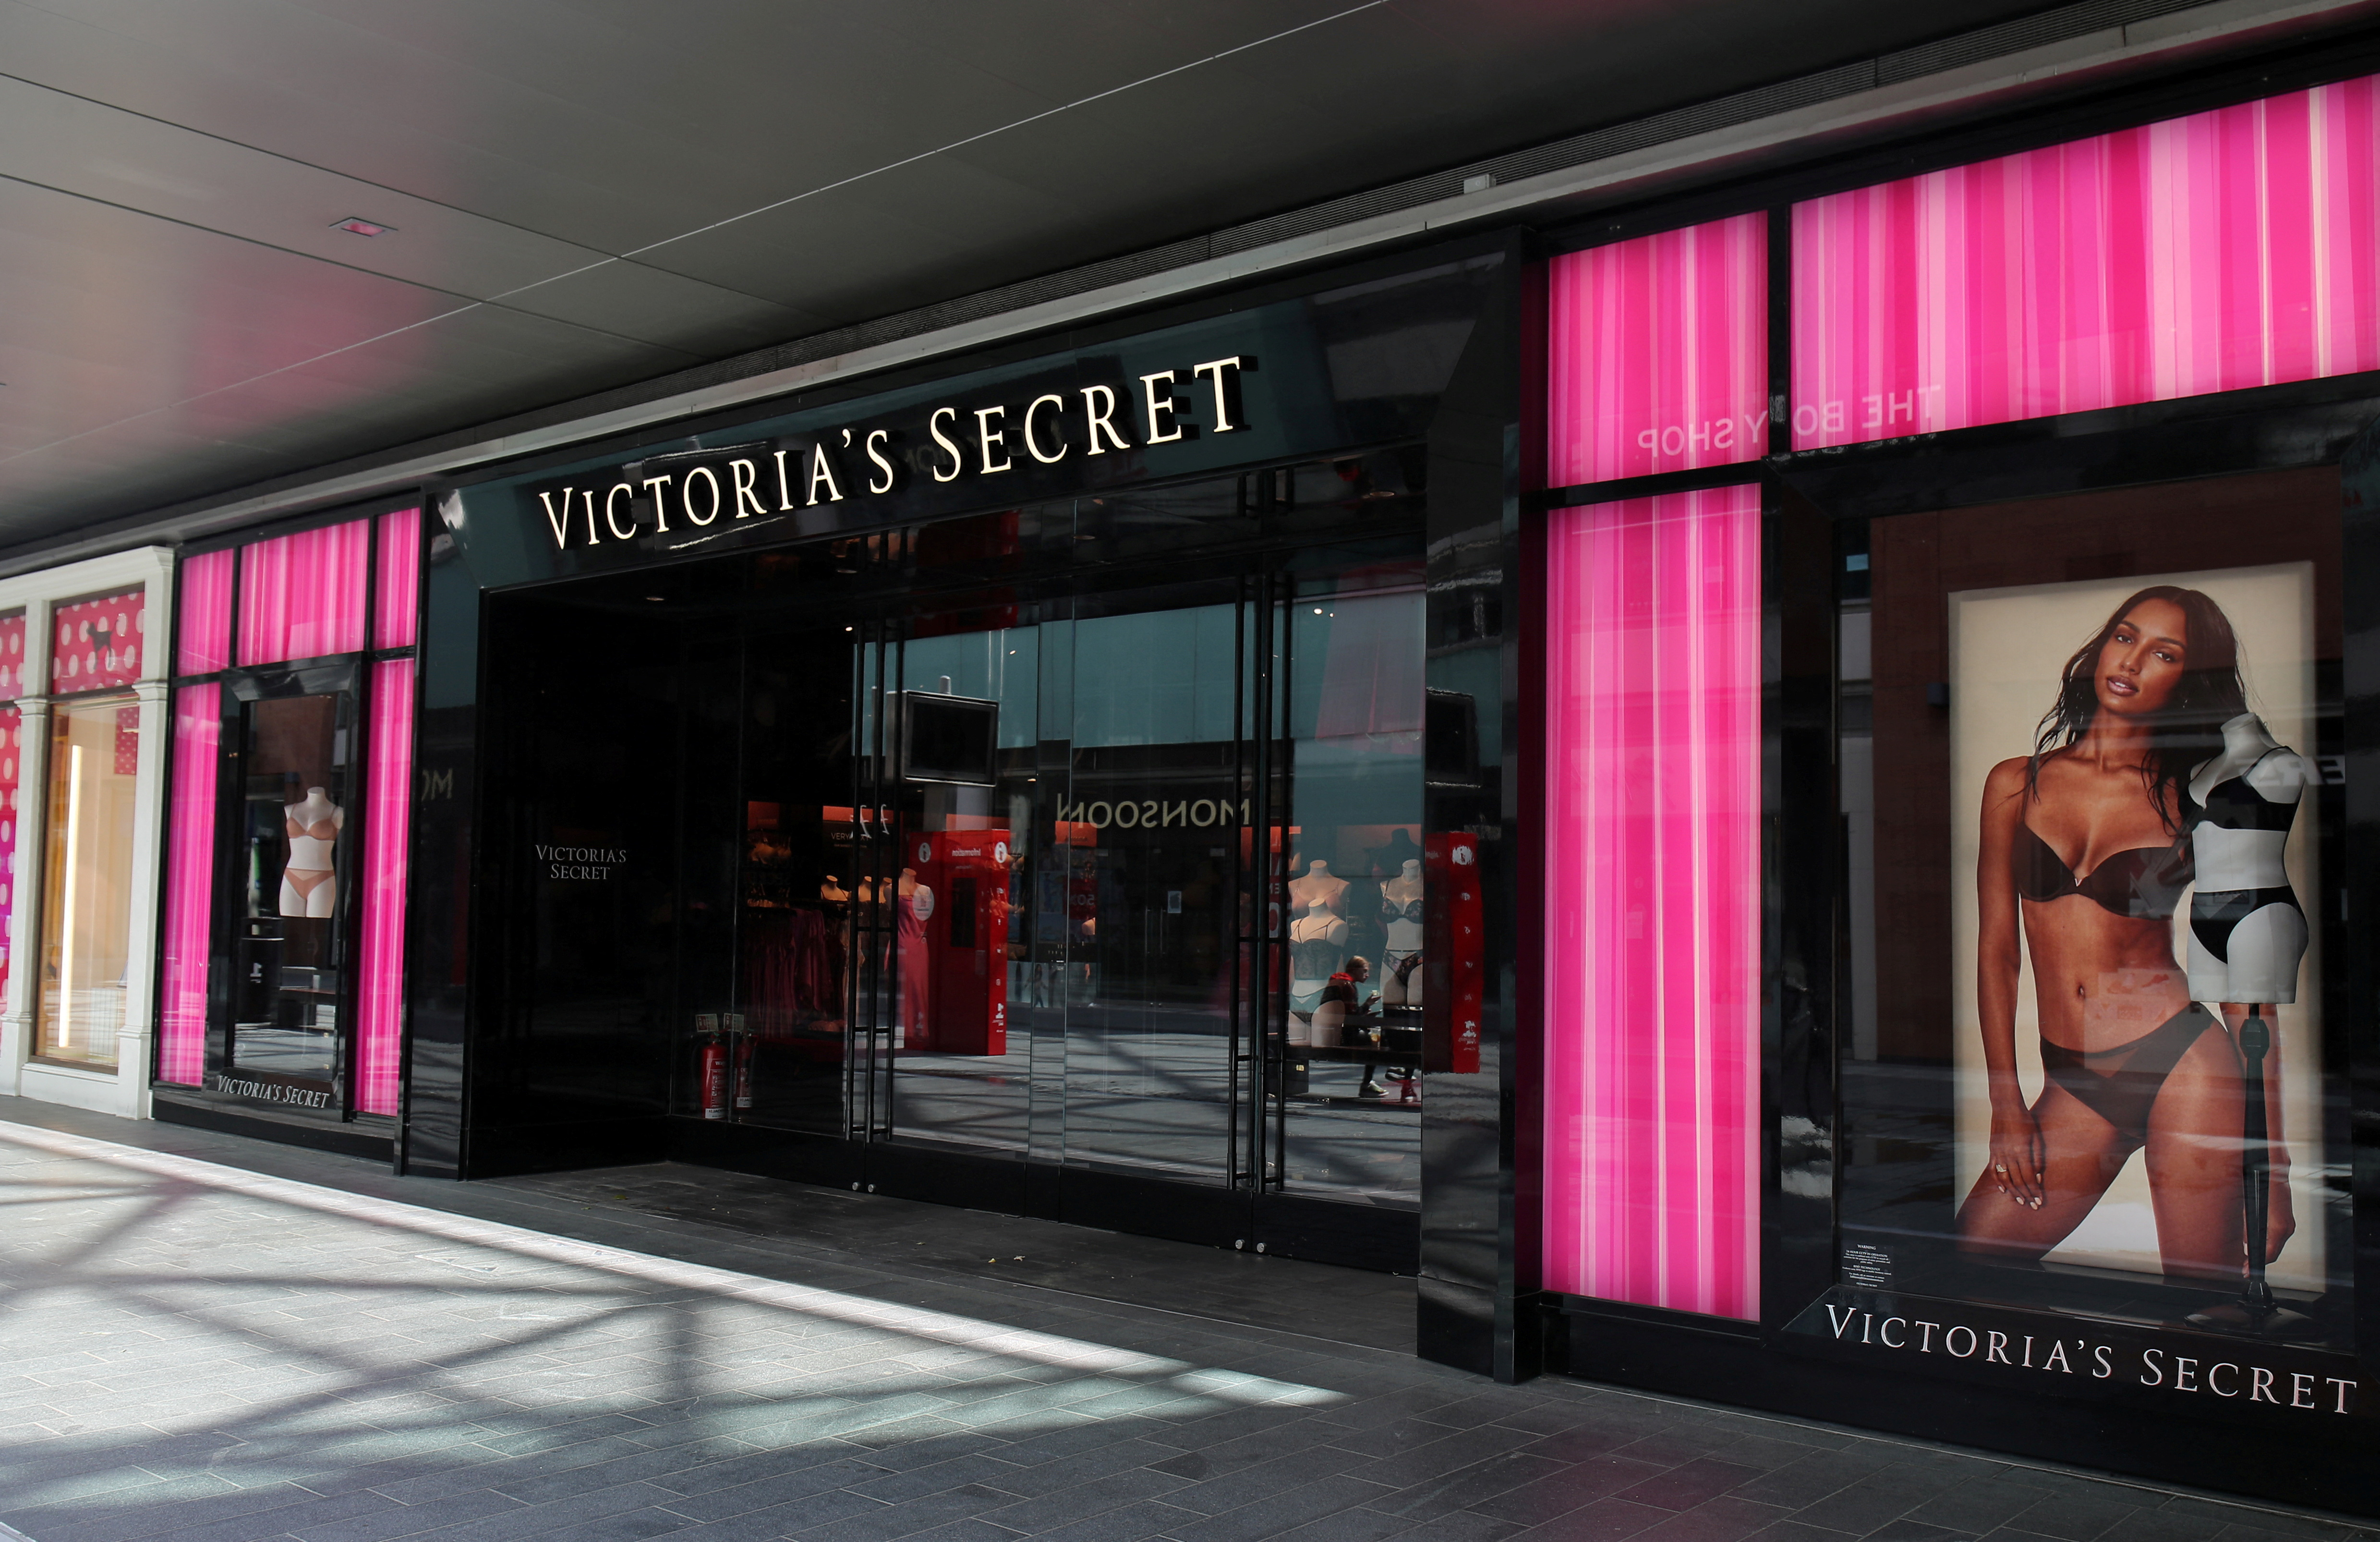 We Went to a Victoria's Secret and Saw Why the Brand Is Struggling